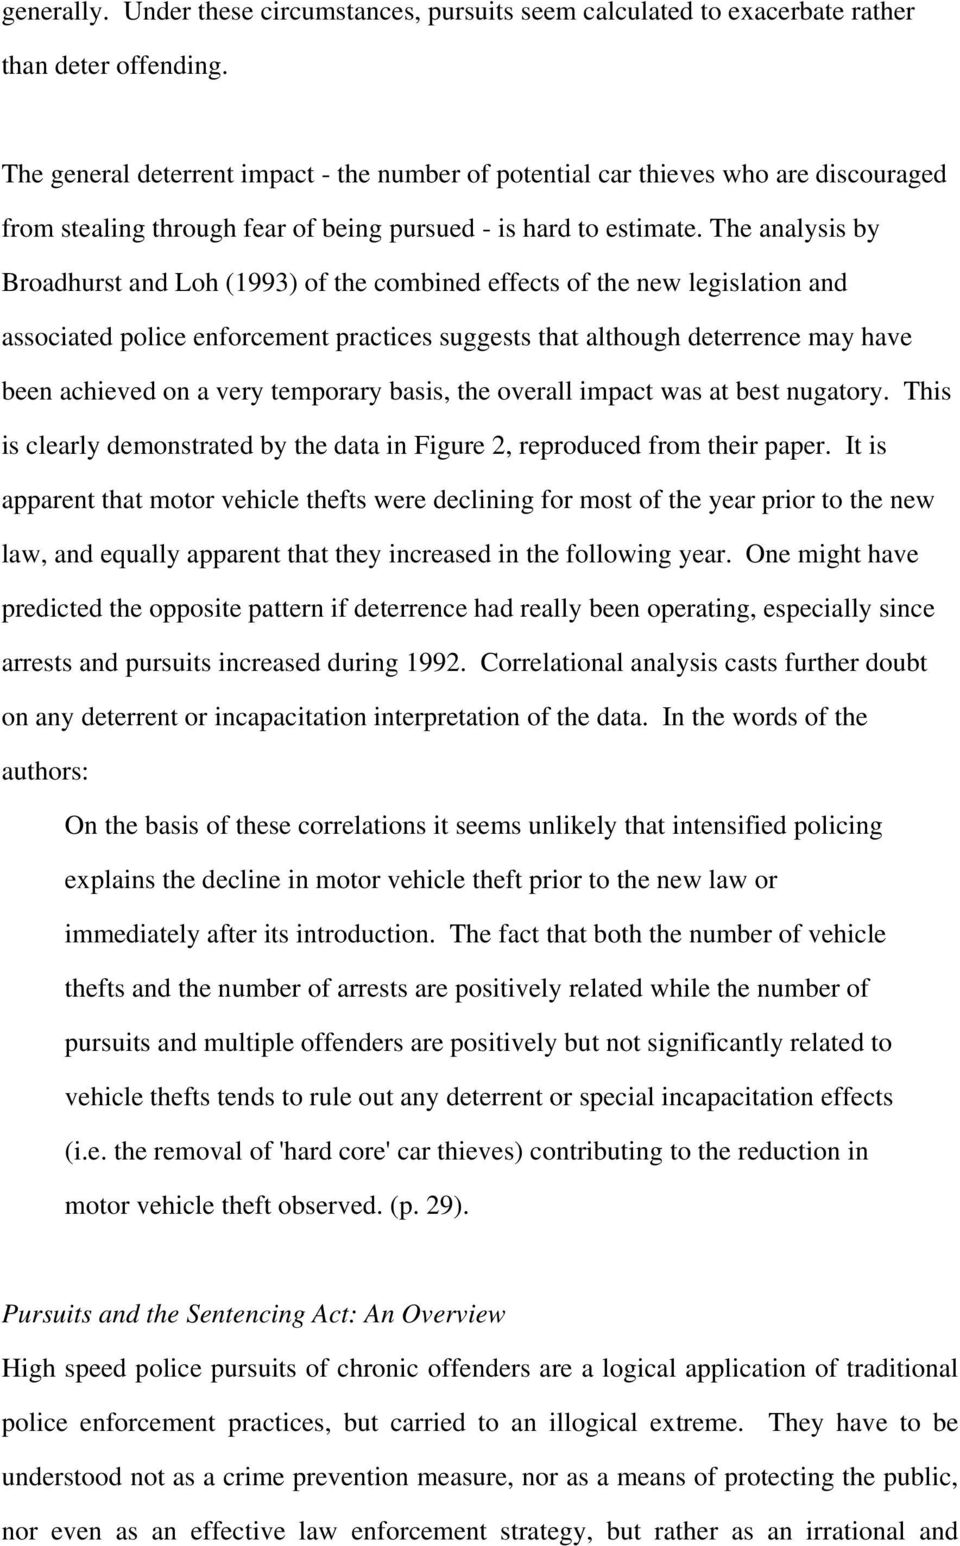 The analysis by Broadhurst and Loh (1993) of the combined effects of the new legislation and associated police enforcement practices suggests that although deterrence may have been achieved on a very